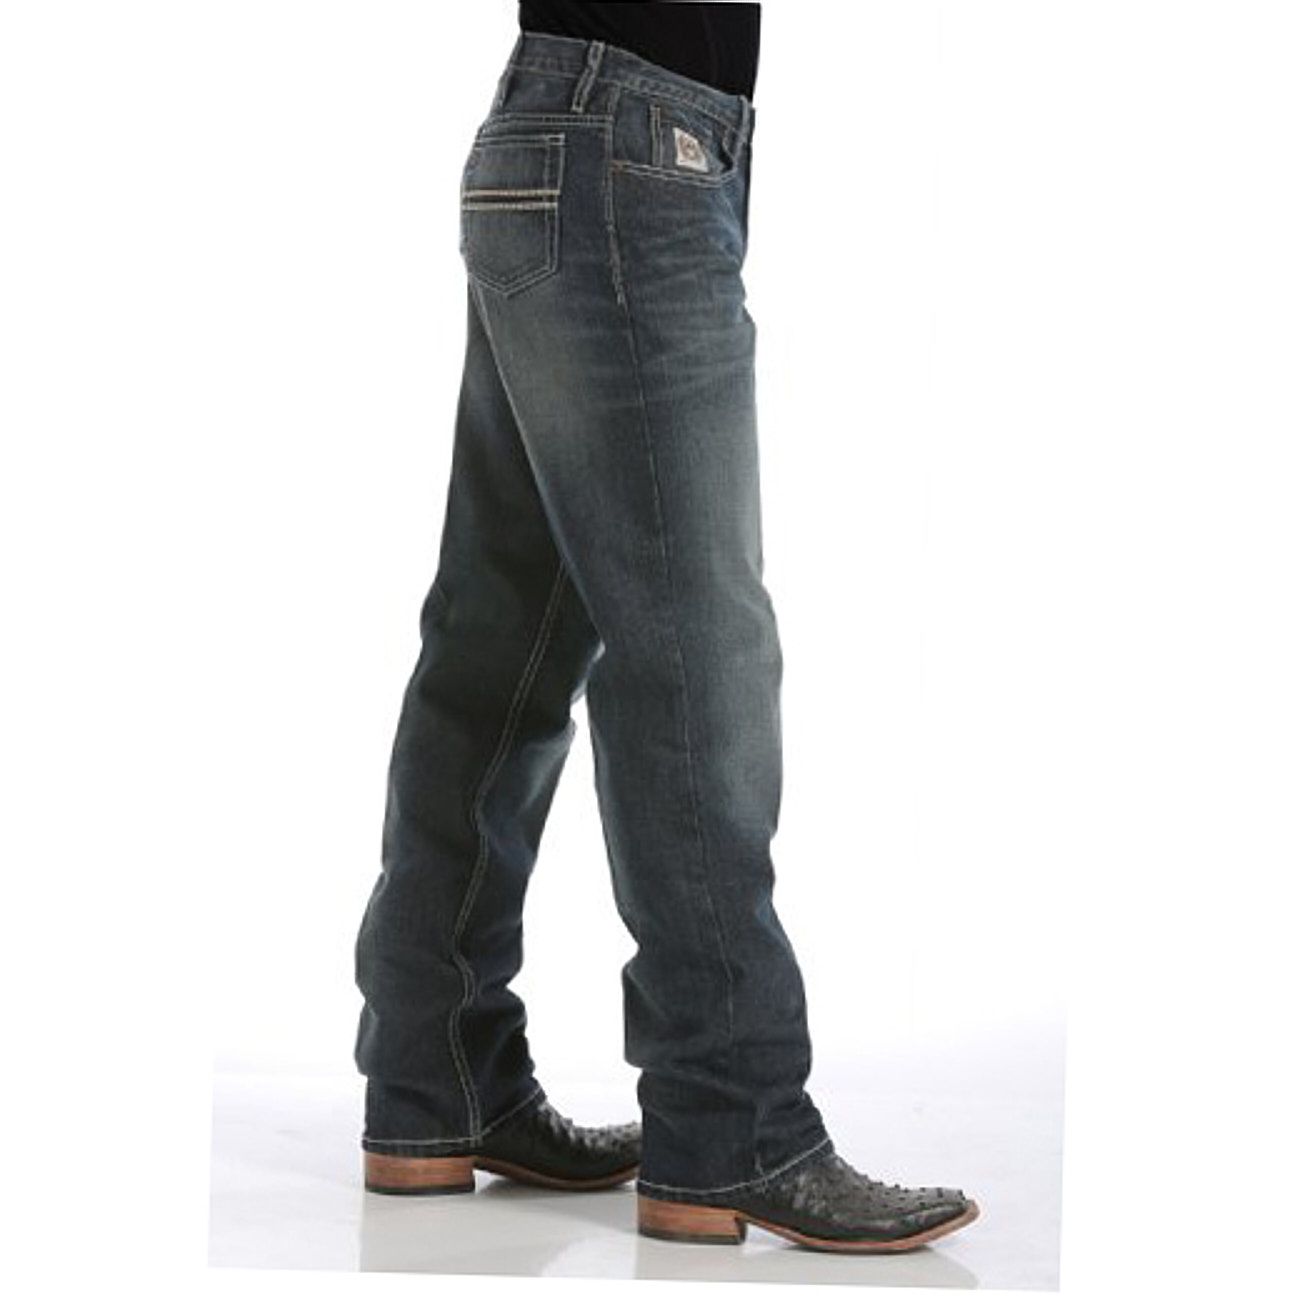 Cinch Men's White Label Relaxed Fit Mid Rise Jeans Tall Dark Stone 42W x 30L  US - image 3 of 3